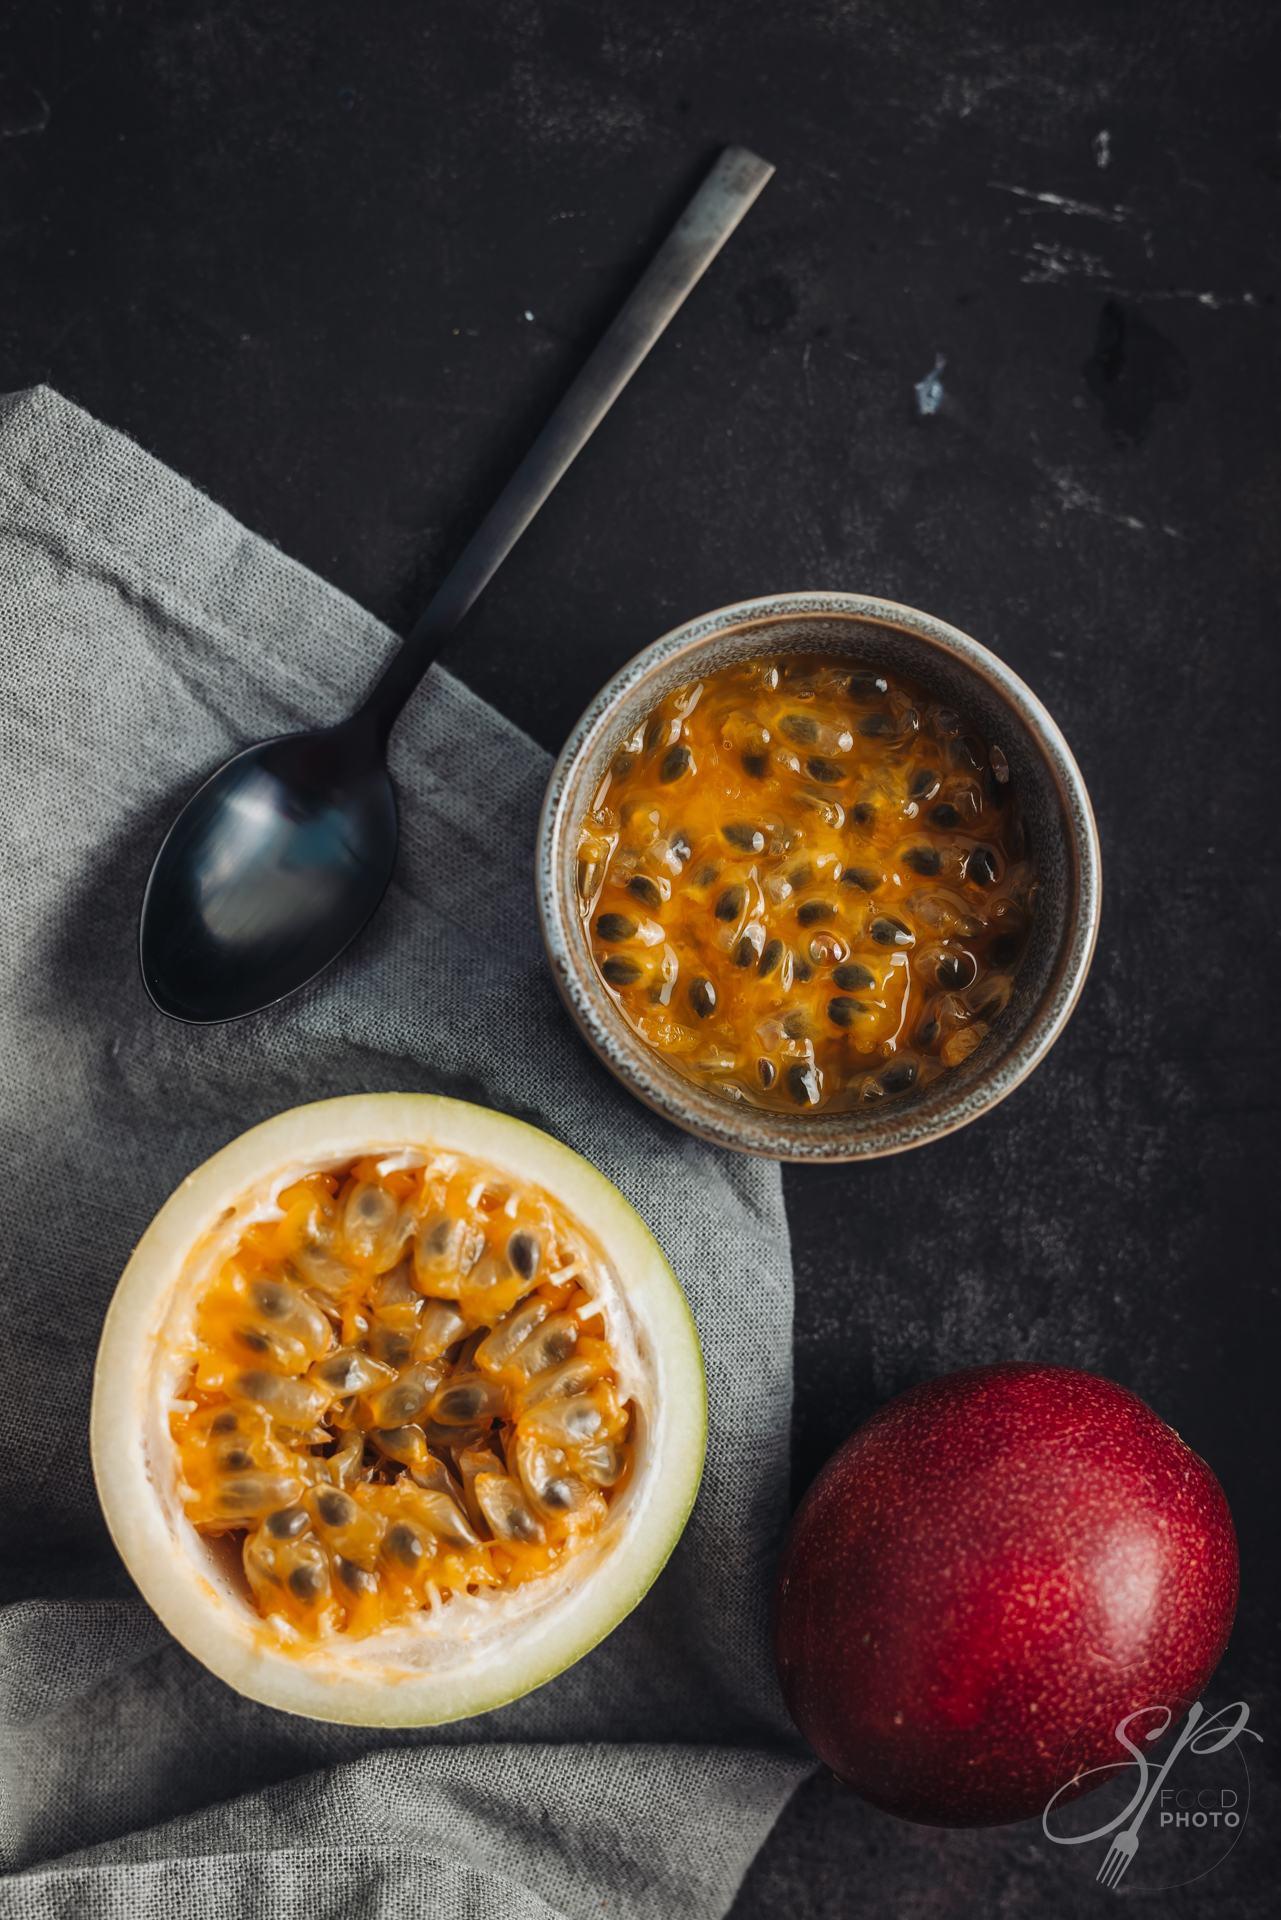 Fresh and juicy raw passion fruit and maracuja